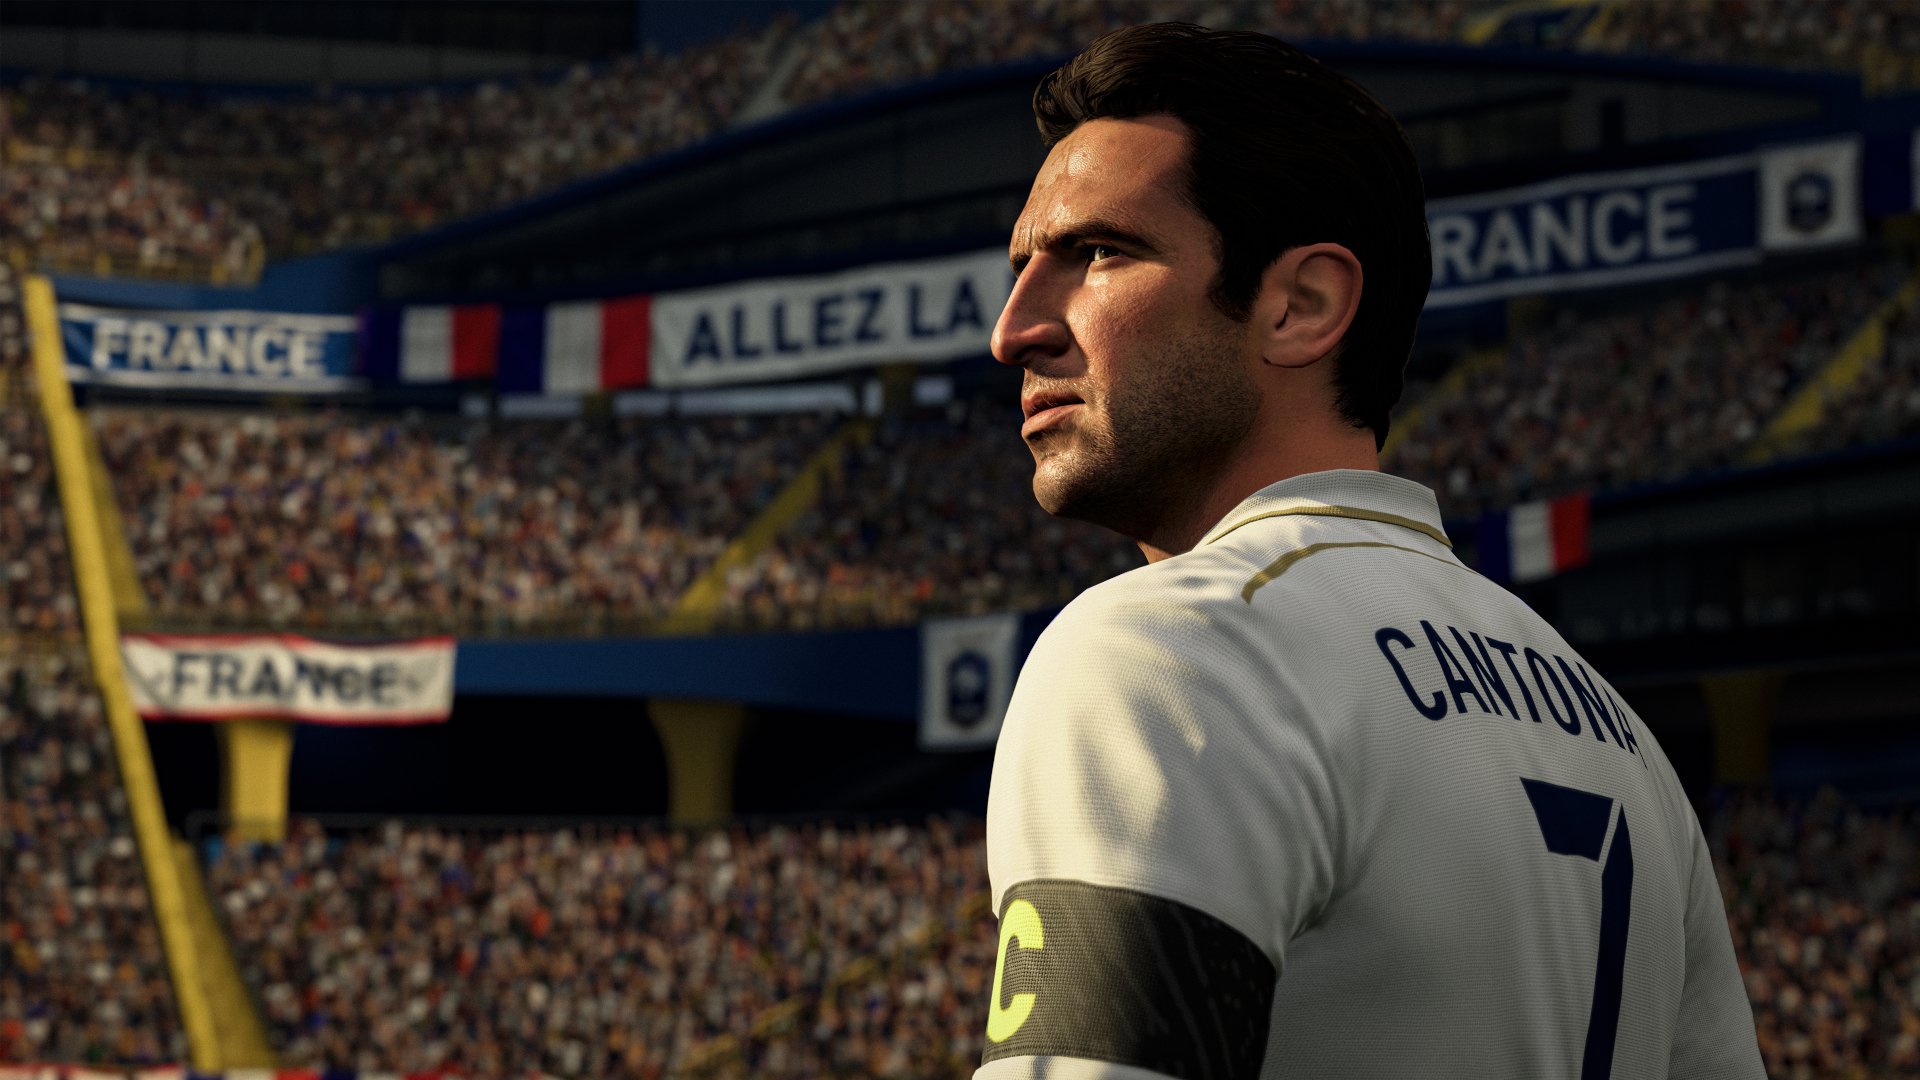 Fifa 21 S Load Times Will Be Blazing Fast On Next Gen Consoles The Loadout